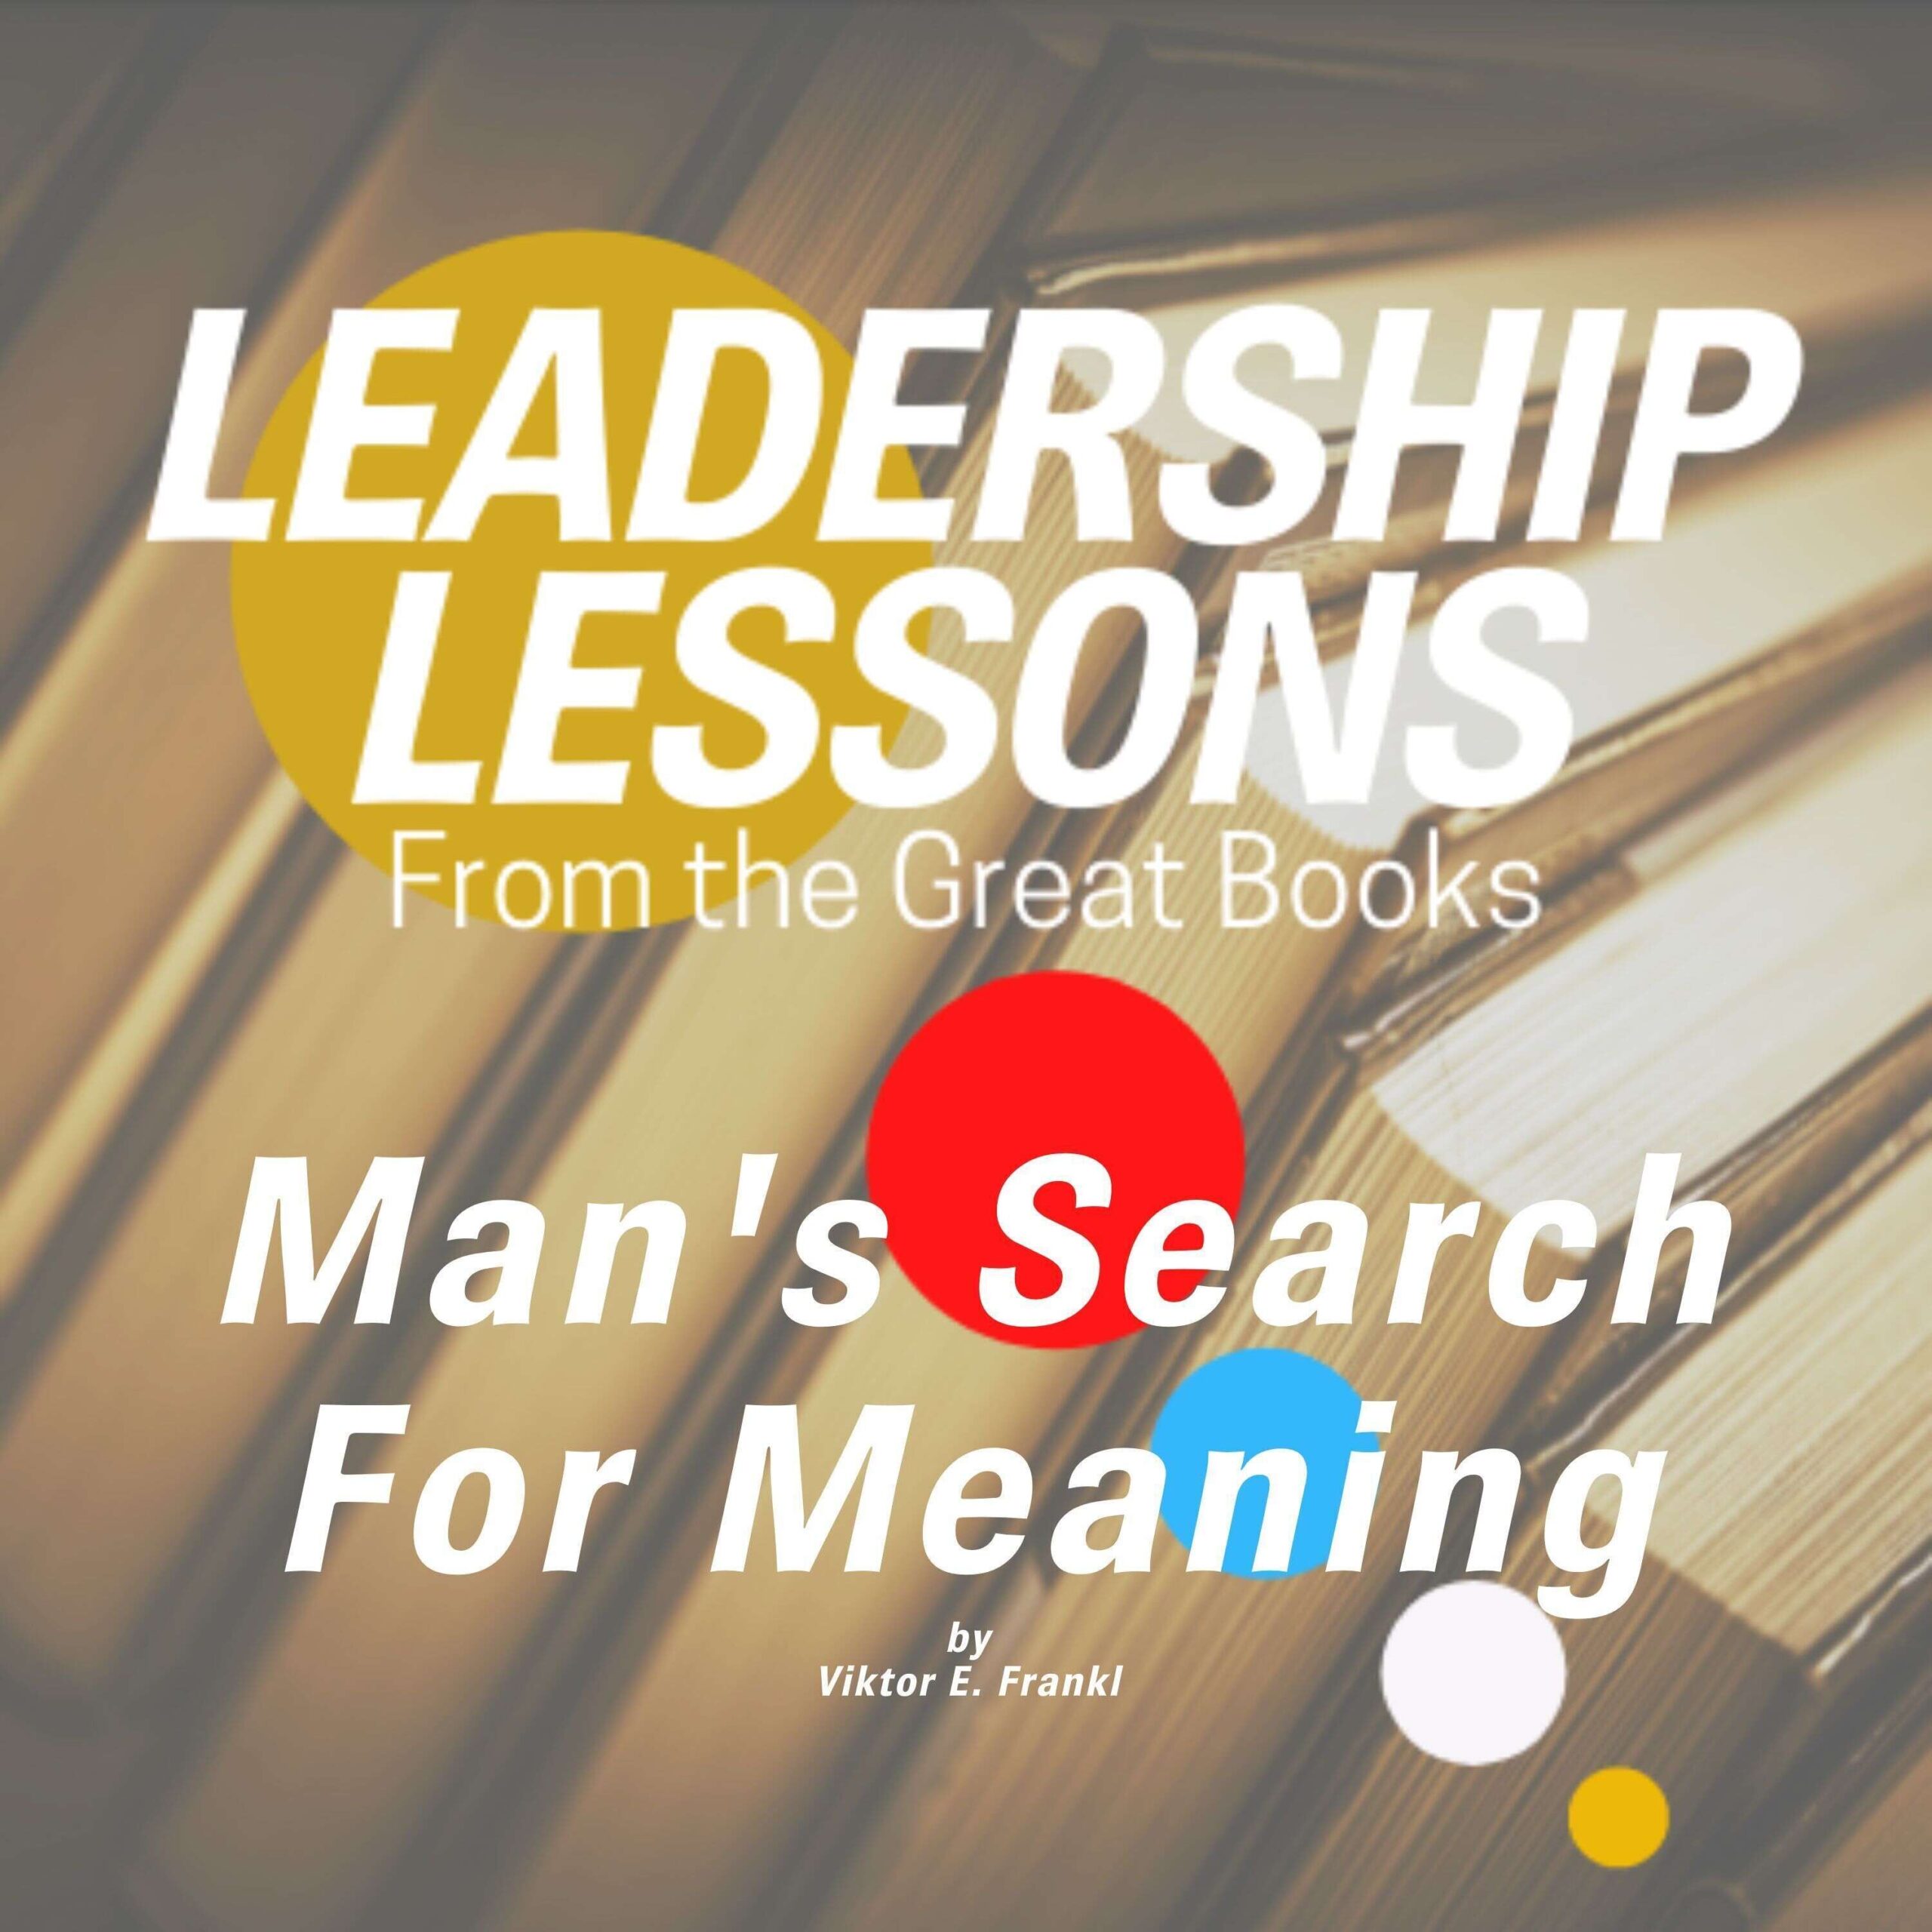 Man’s Search For Meaning (pt1.) by Viktor E. Frankl w/ JP Puchulu